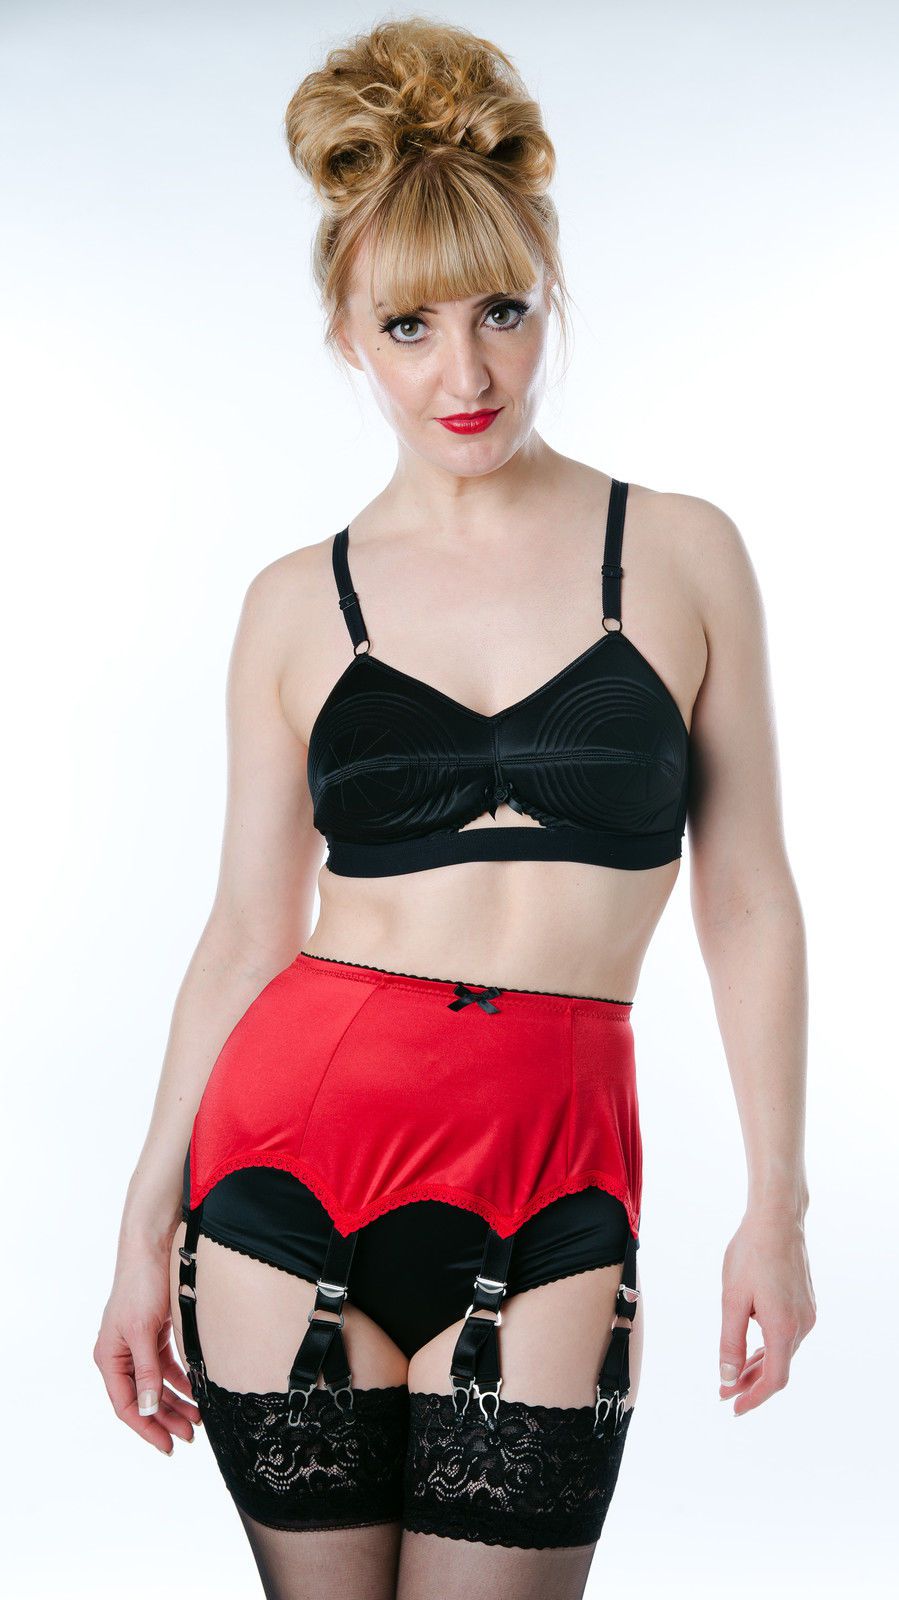 ny1072rb_porte-jarretelles-retro-50-s-pin-up-rockabilly-glamour-6-straps-double-rouge